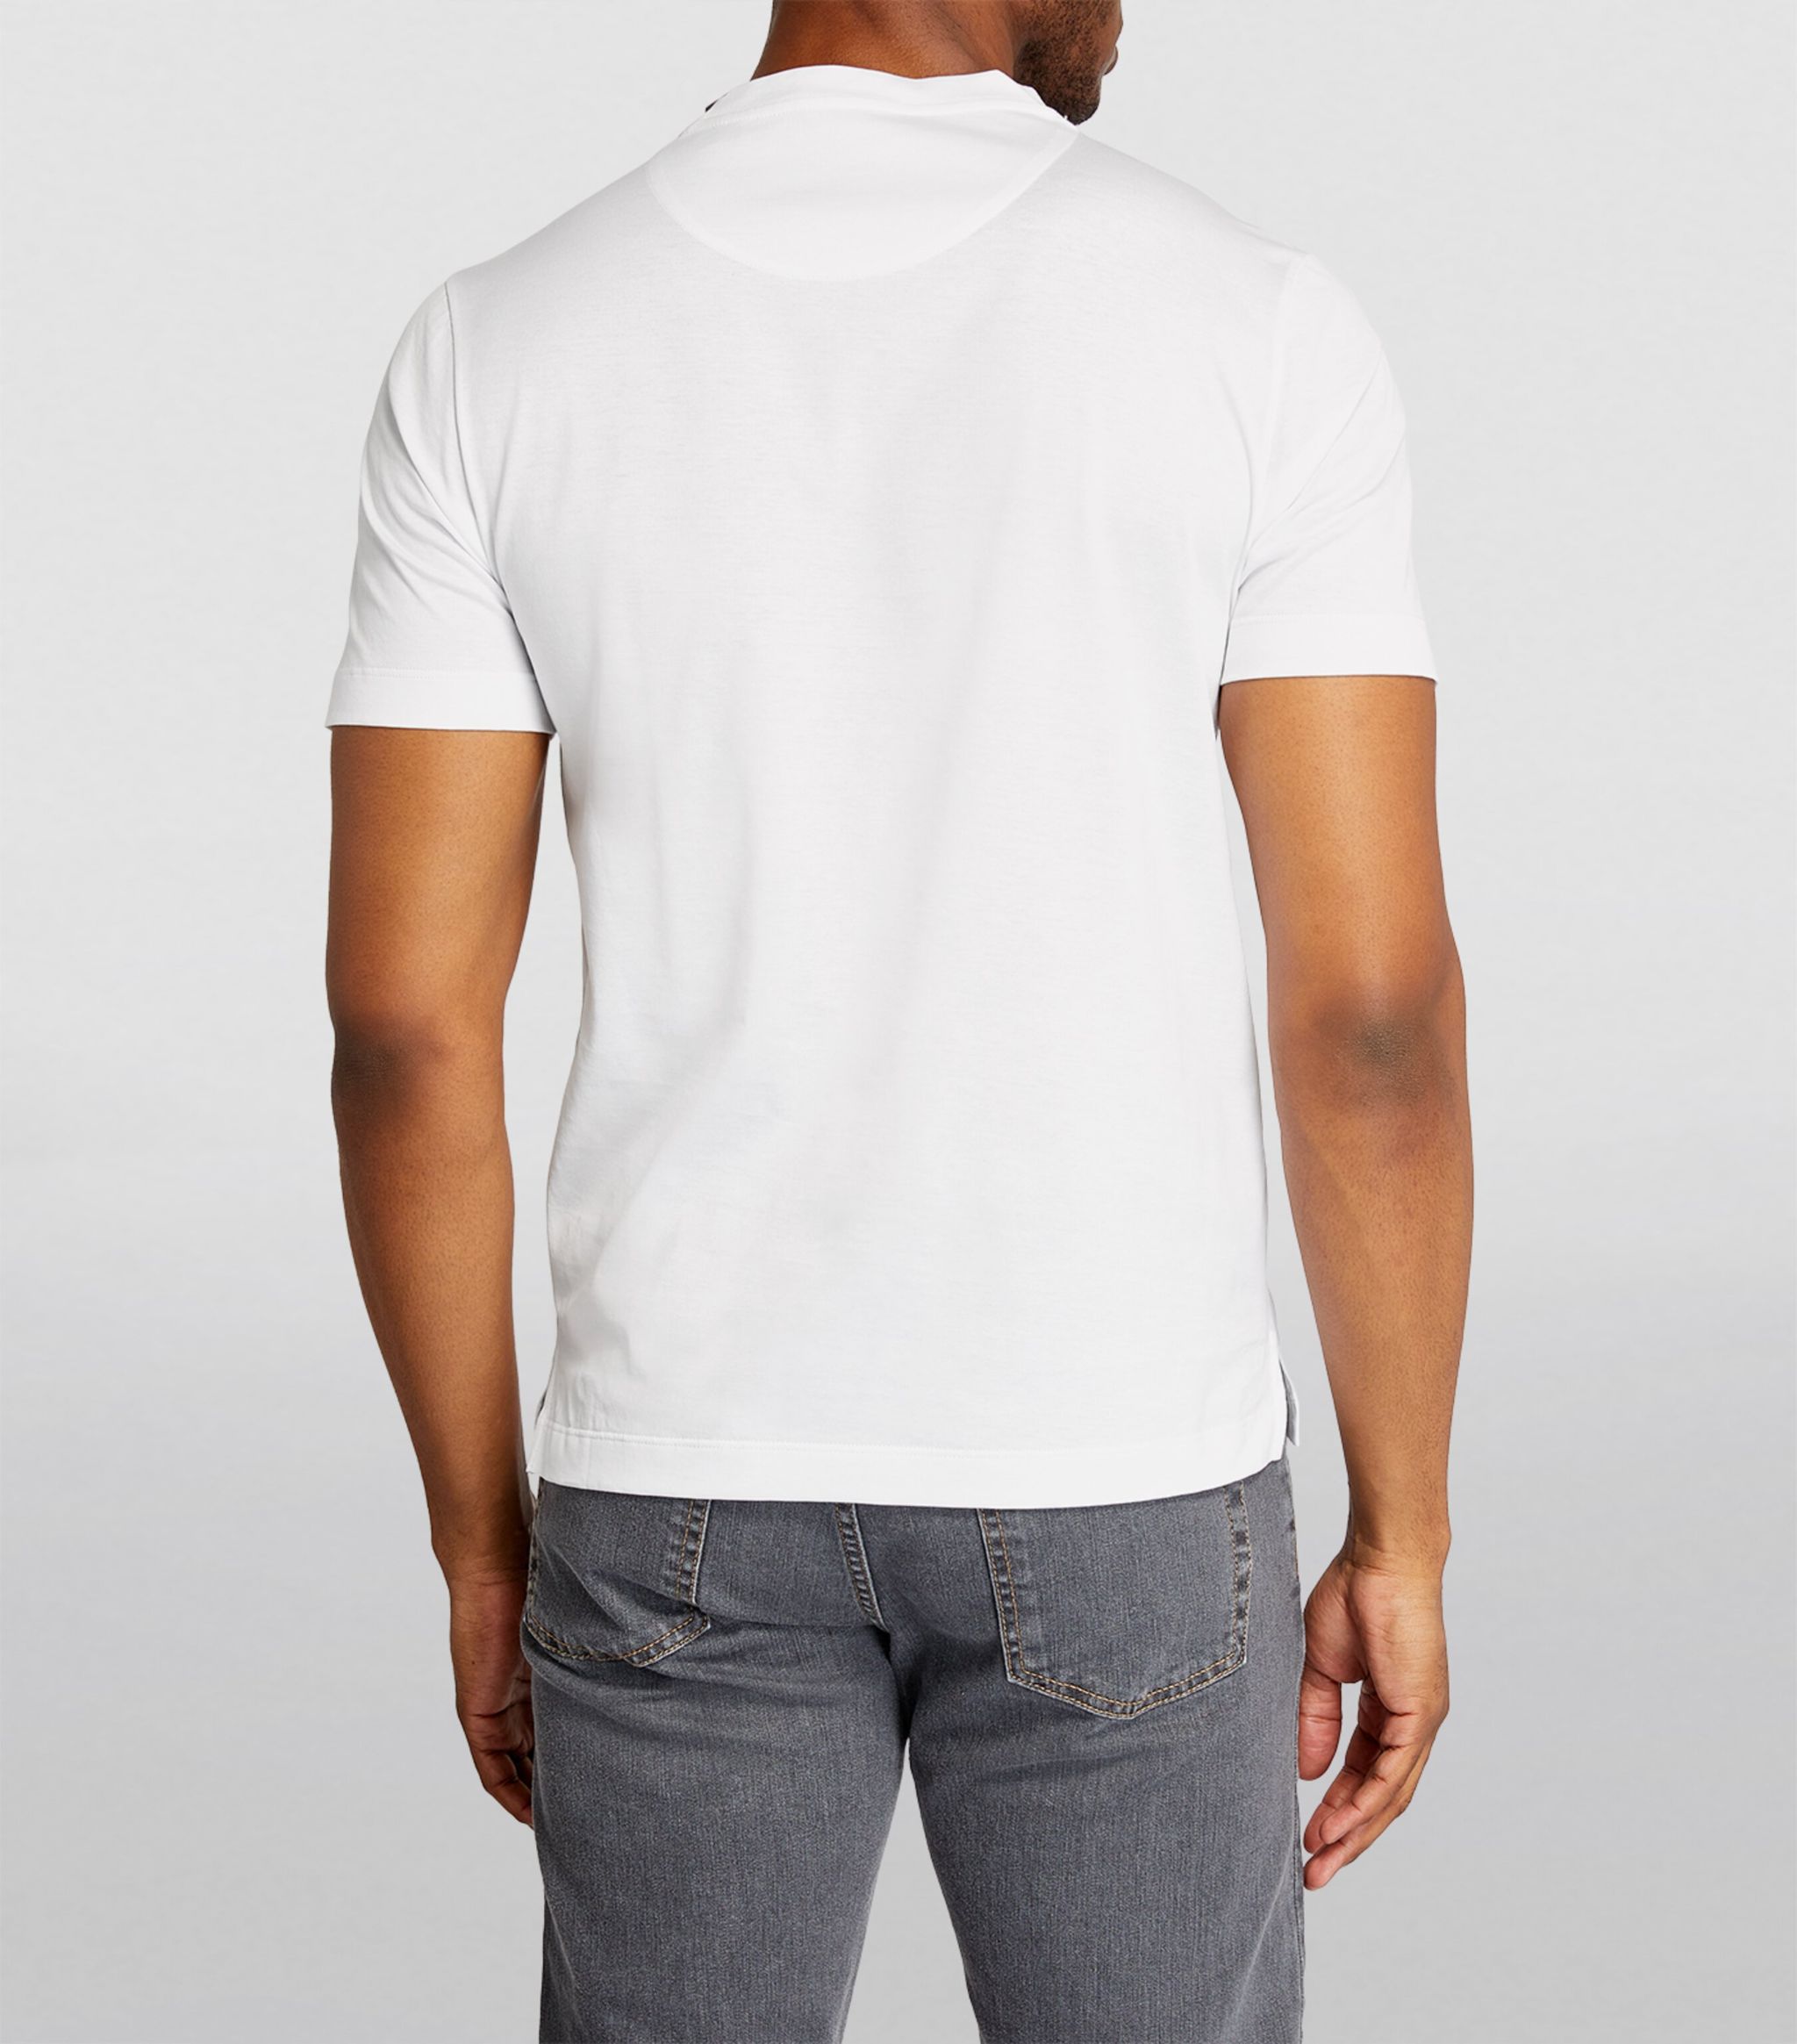 Polyester Stretchable Solid Half Sleeves Men's Round Neck T-Shirt (Pack Of 5) 🔥